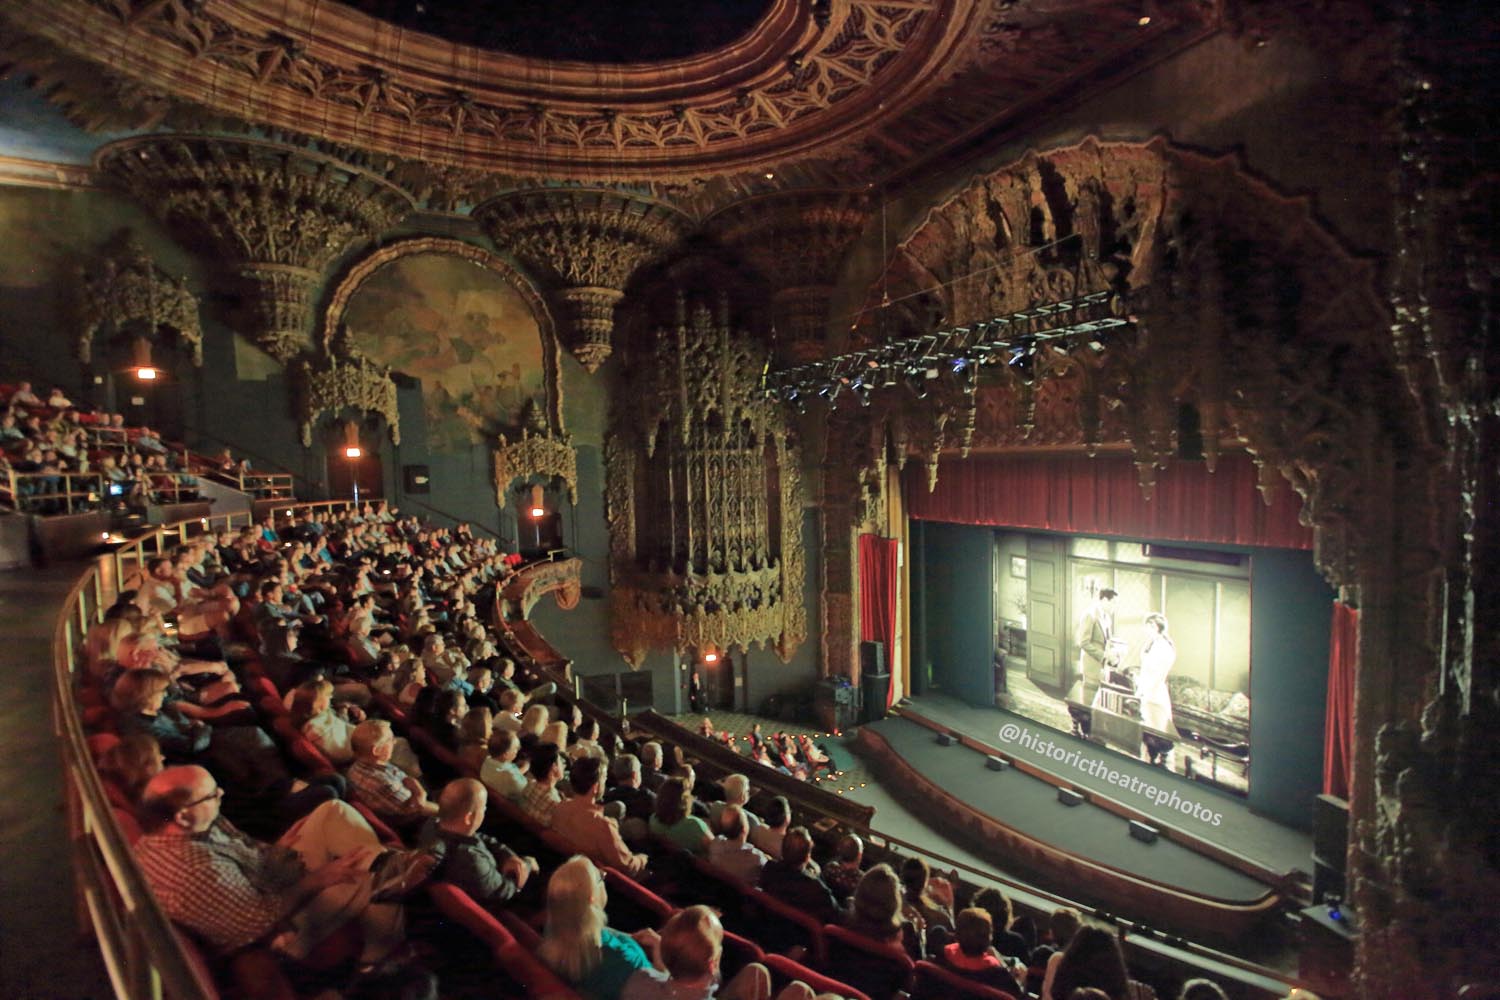 The United Theater on Broadway, Los Angeles: <i>Last Remaining Seats</i> 2017 Audience from Balcony